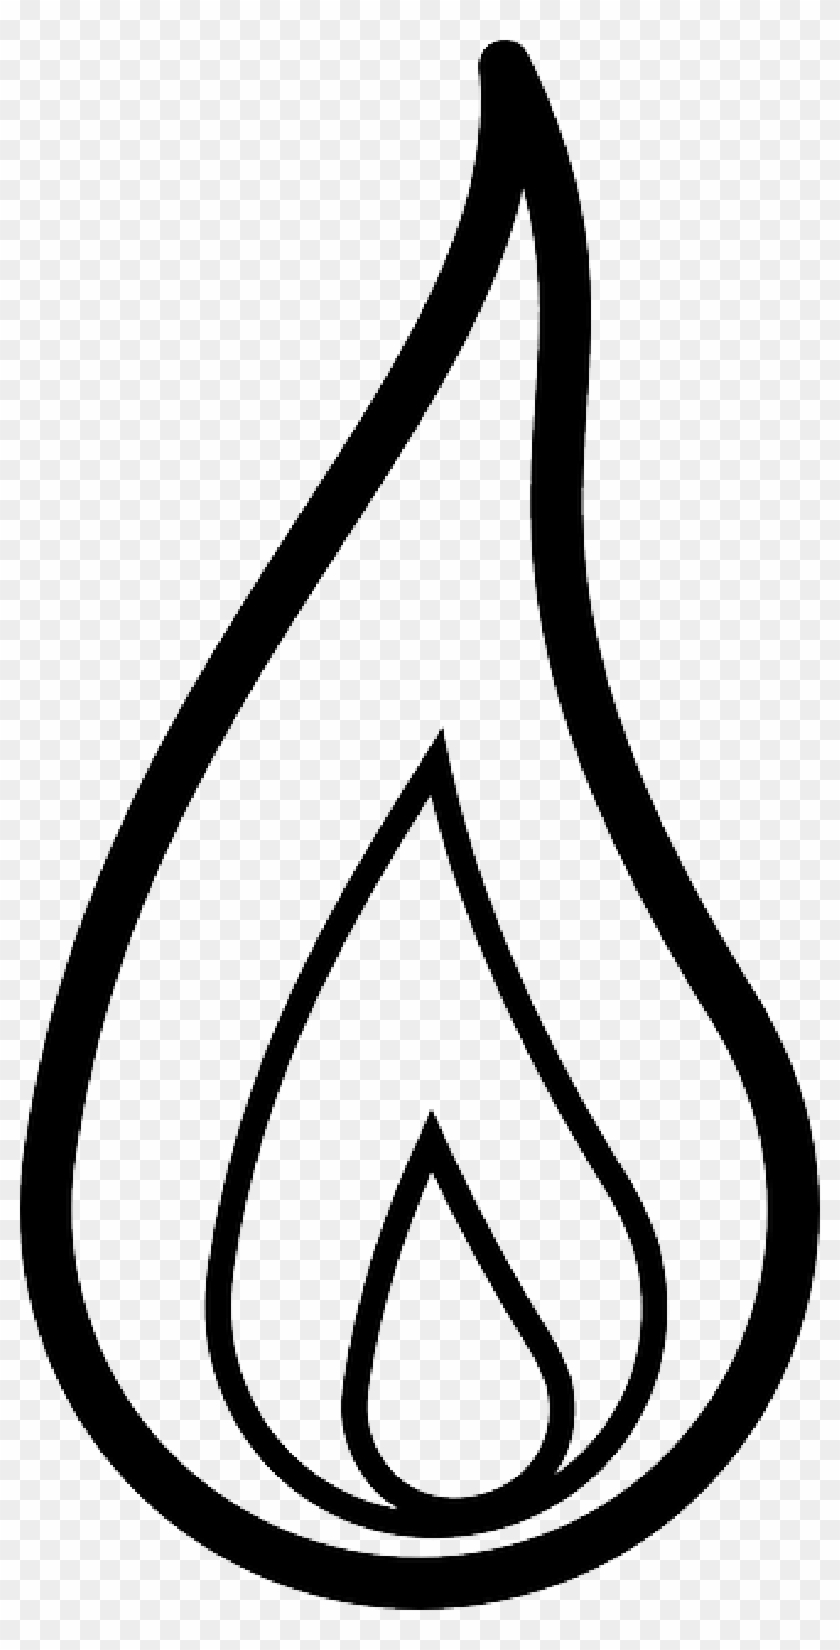 Drawn Candle Outline - Flame Clipart Black And White #1089482